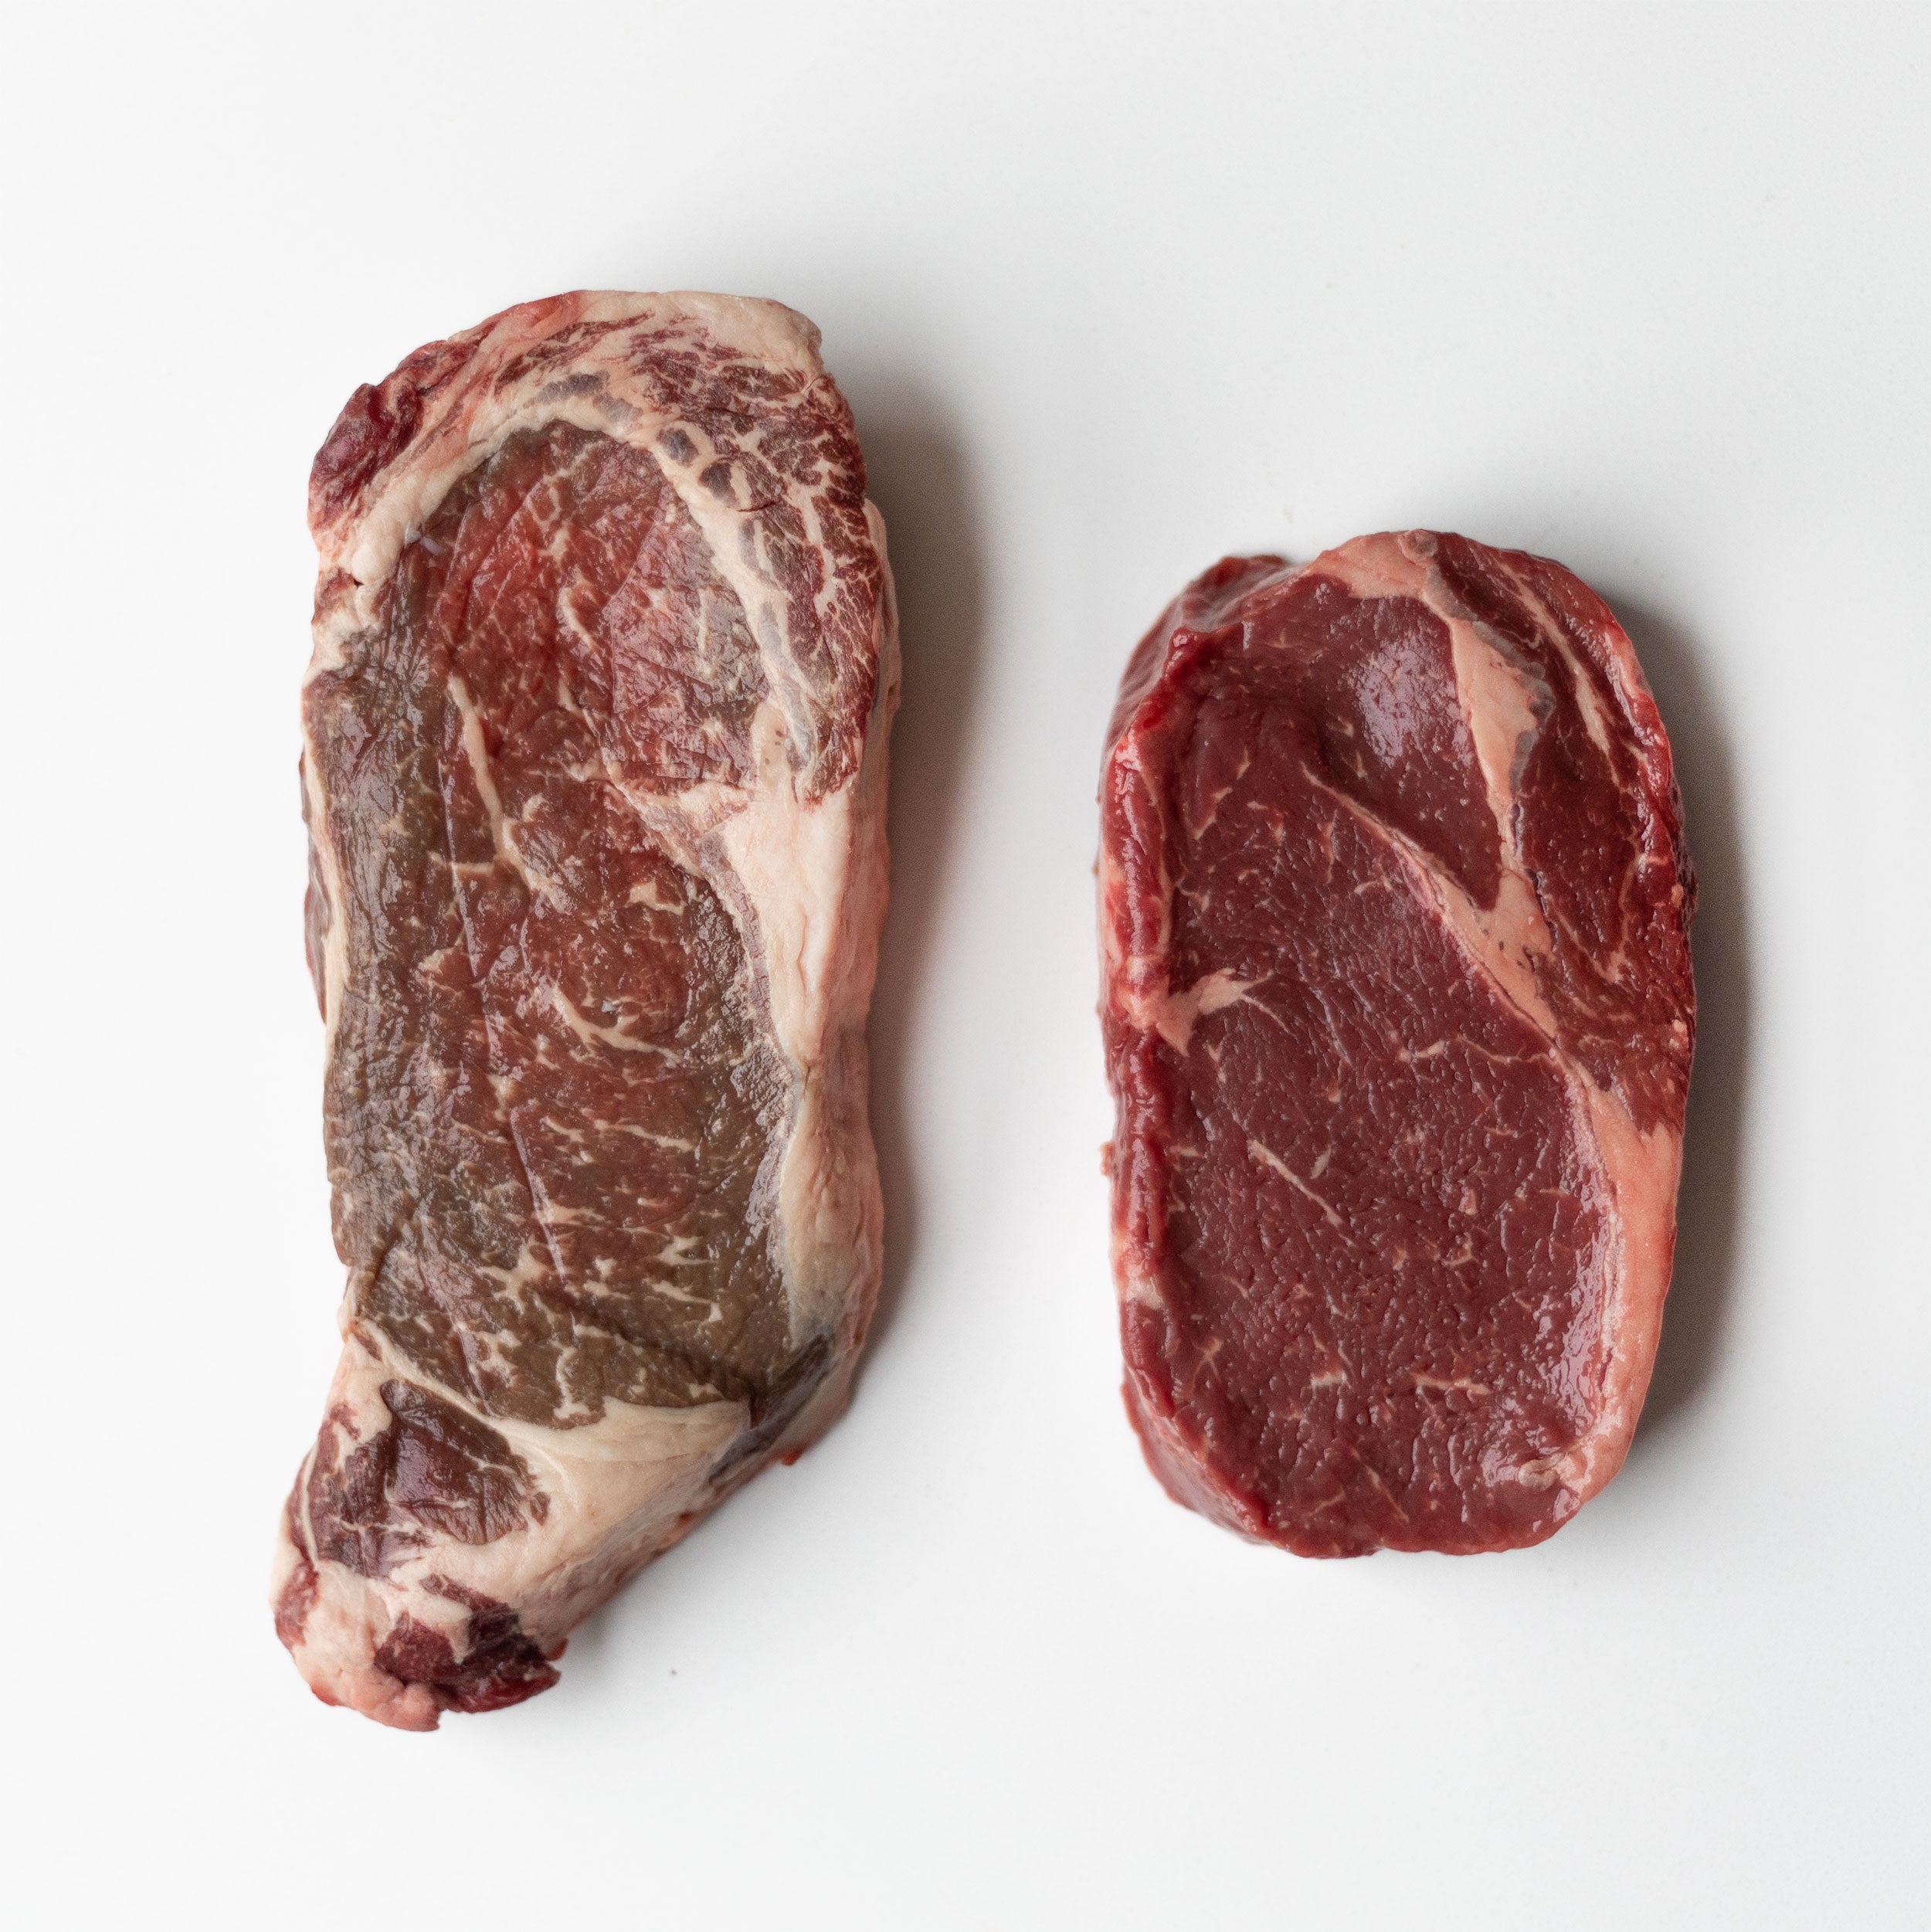 Your Questions: How long will meat last in the fridge or freezer?